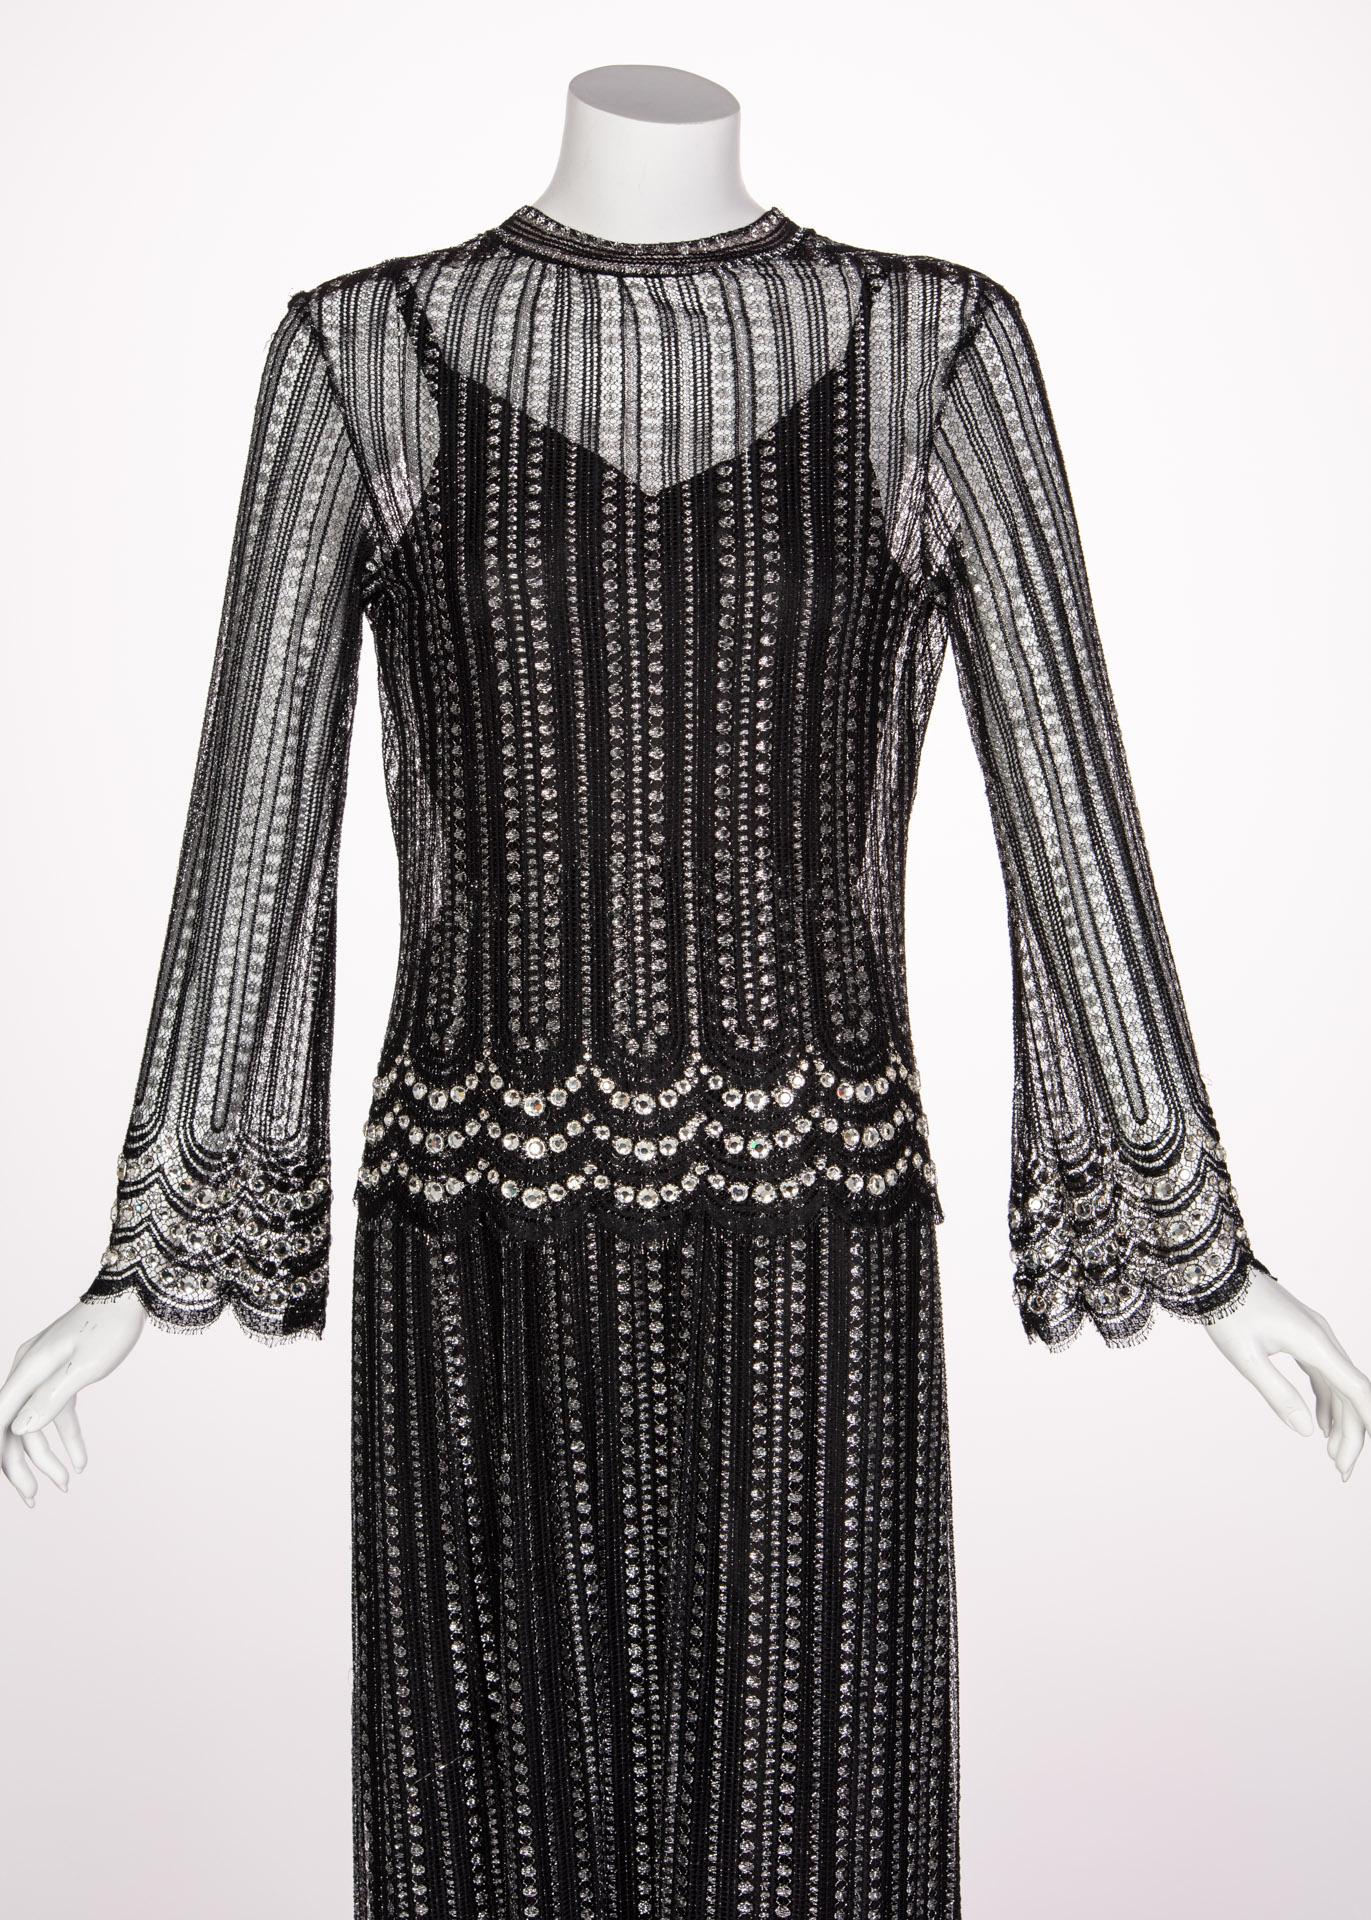 Christian Dior Attributed  Black and Silver Lace Crystals Maxi Dress, 1970s 3